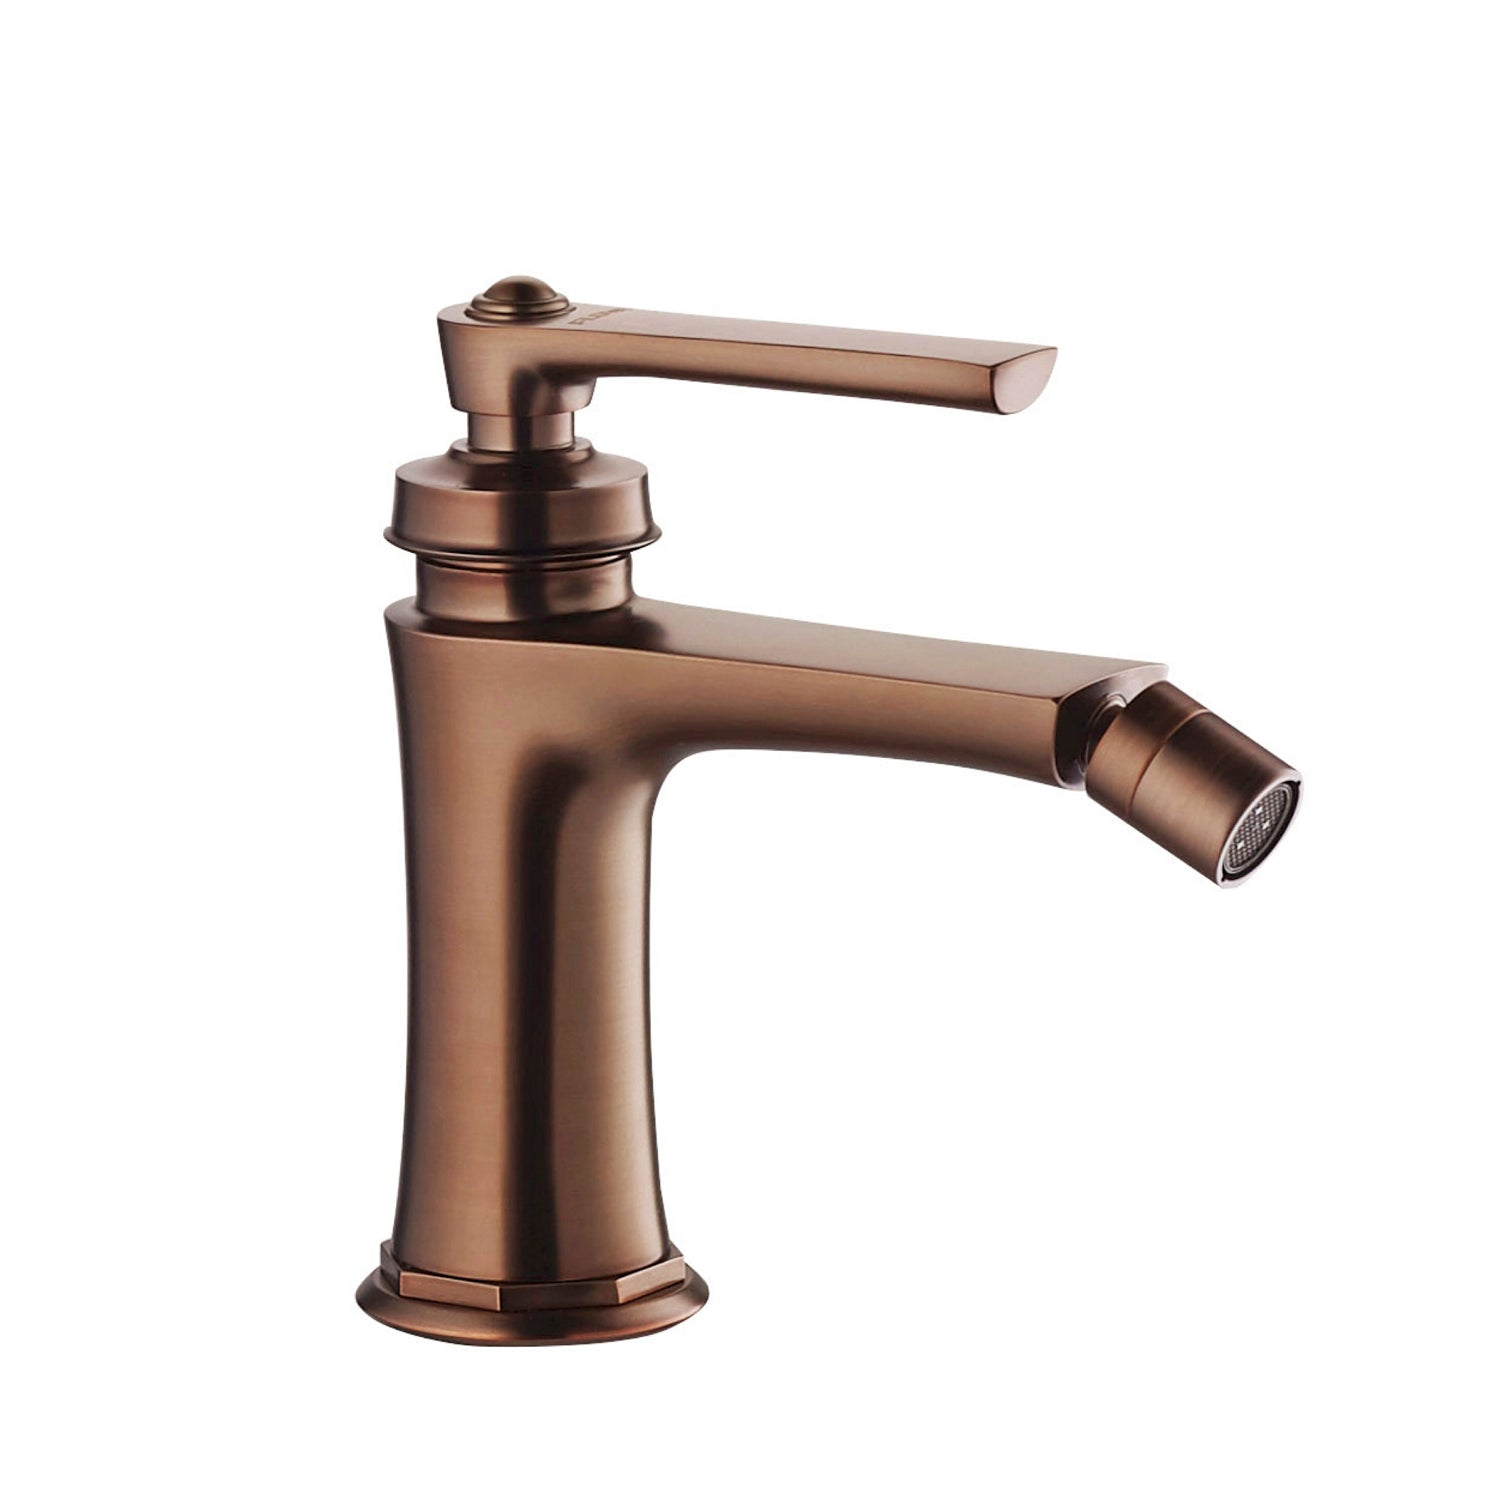 DAX Single Handle Bidet Faucet, Brass Body, Oil Rubbed Bronze Finish, 3-9/16 Inches (DAX-8509-ORB)